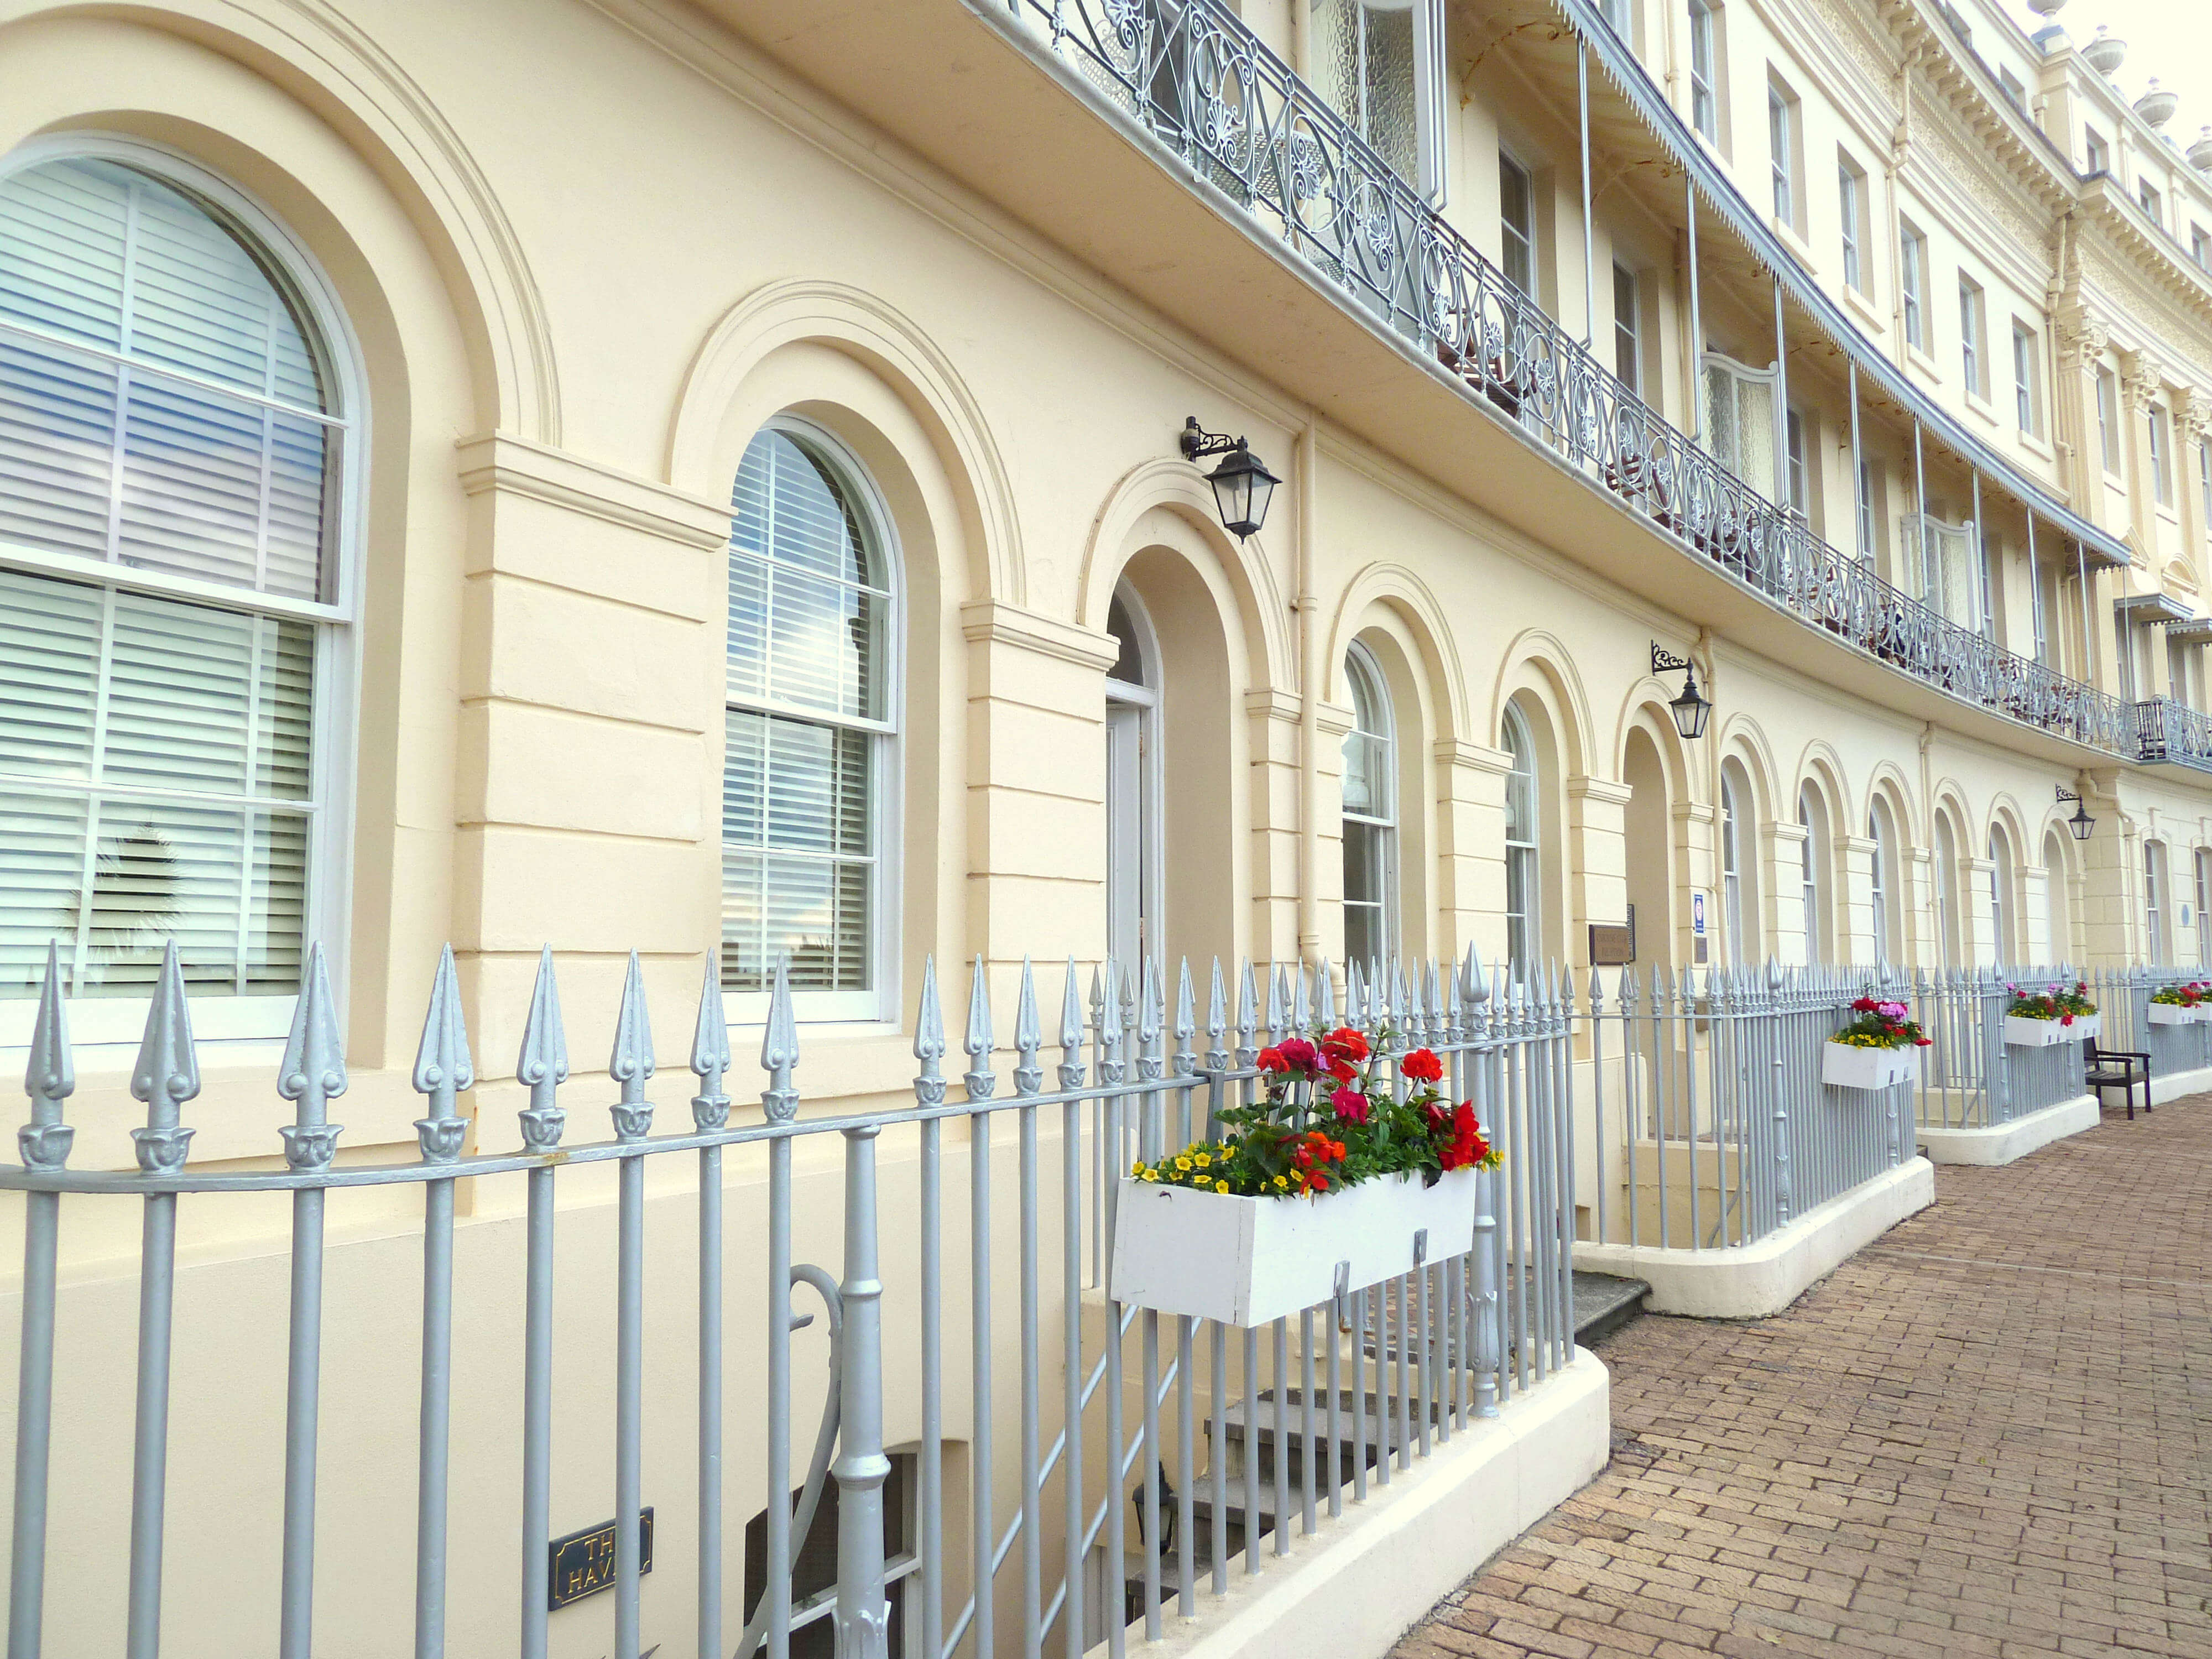 Hesketh Crescent Apartment - an ideal base from which to explore Agatha Christie's Torquay